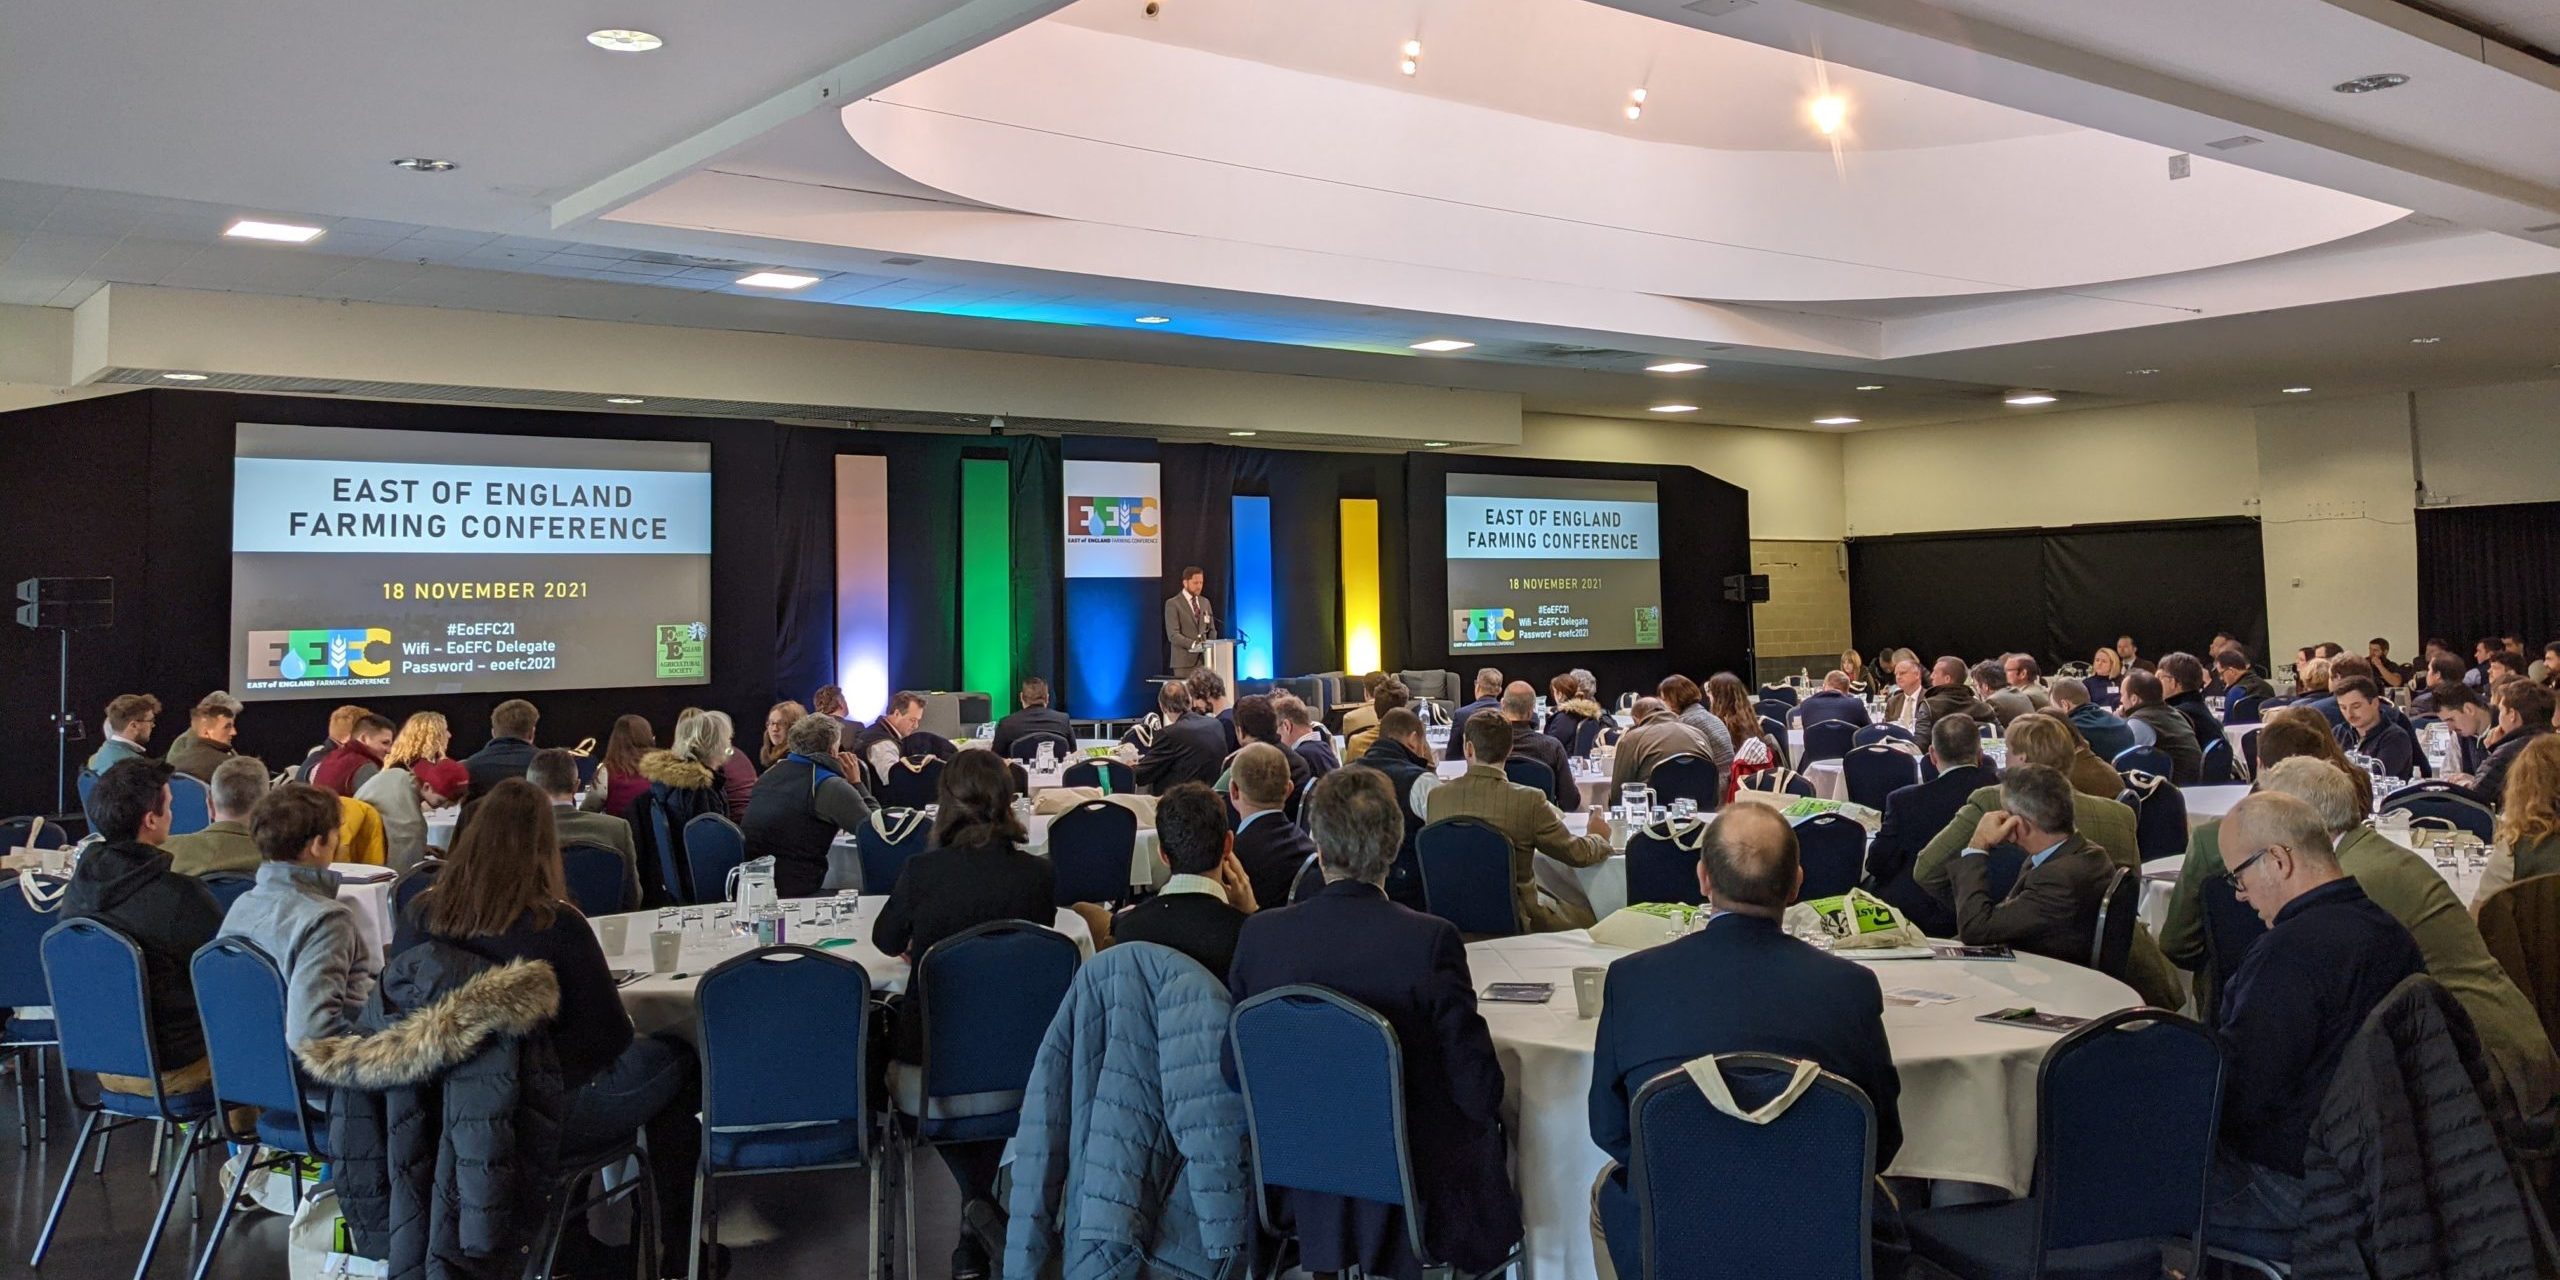 The East of England Farming Conference was back with a bang!